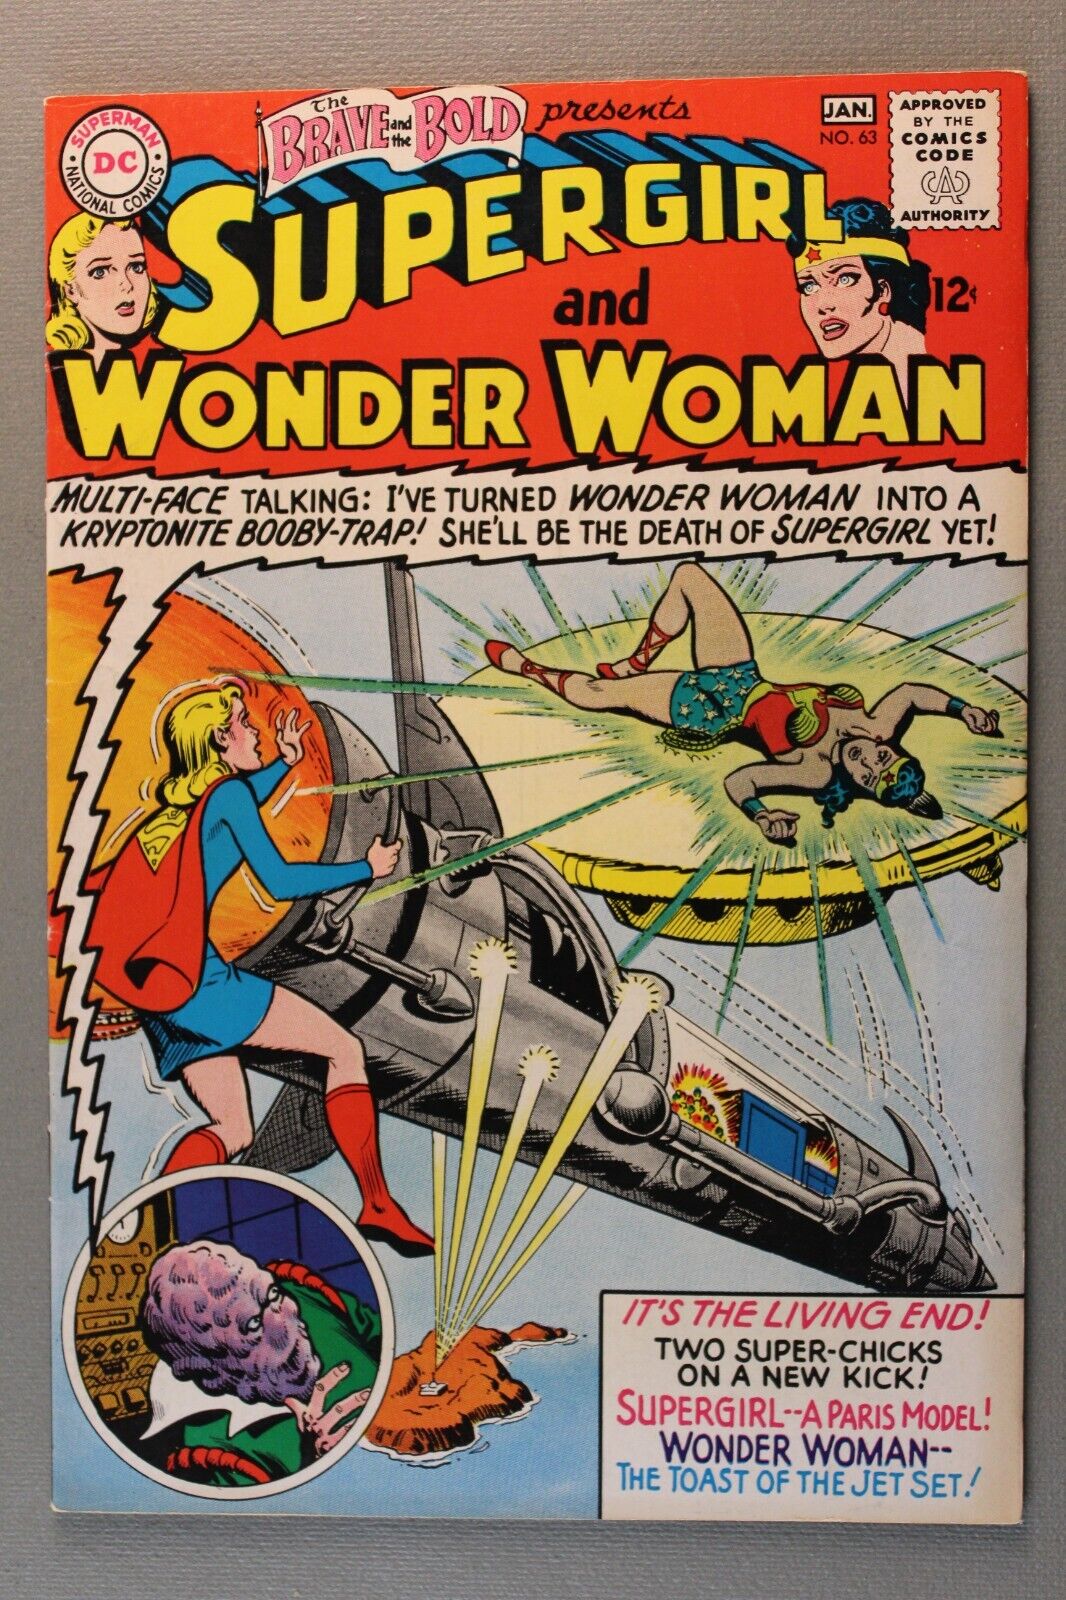 The Brave and the Bold #63 presents SUPERGIRL and WONDER WOMAN *12/65-1/66 